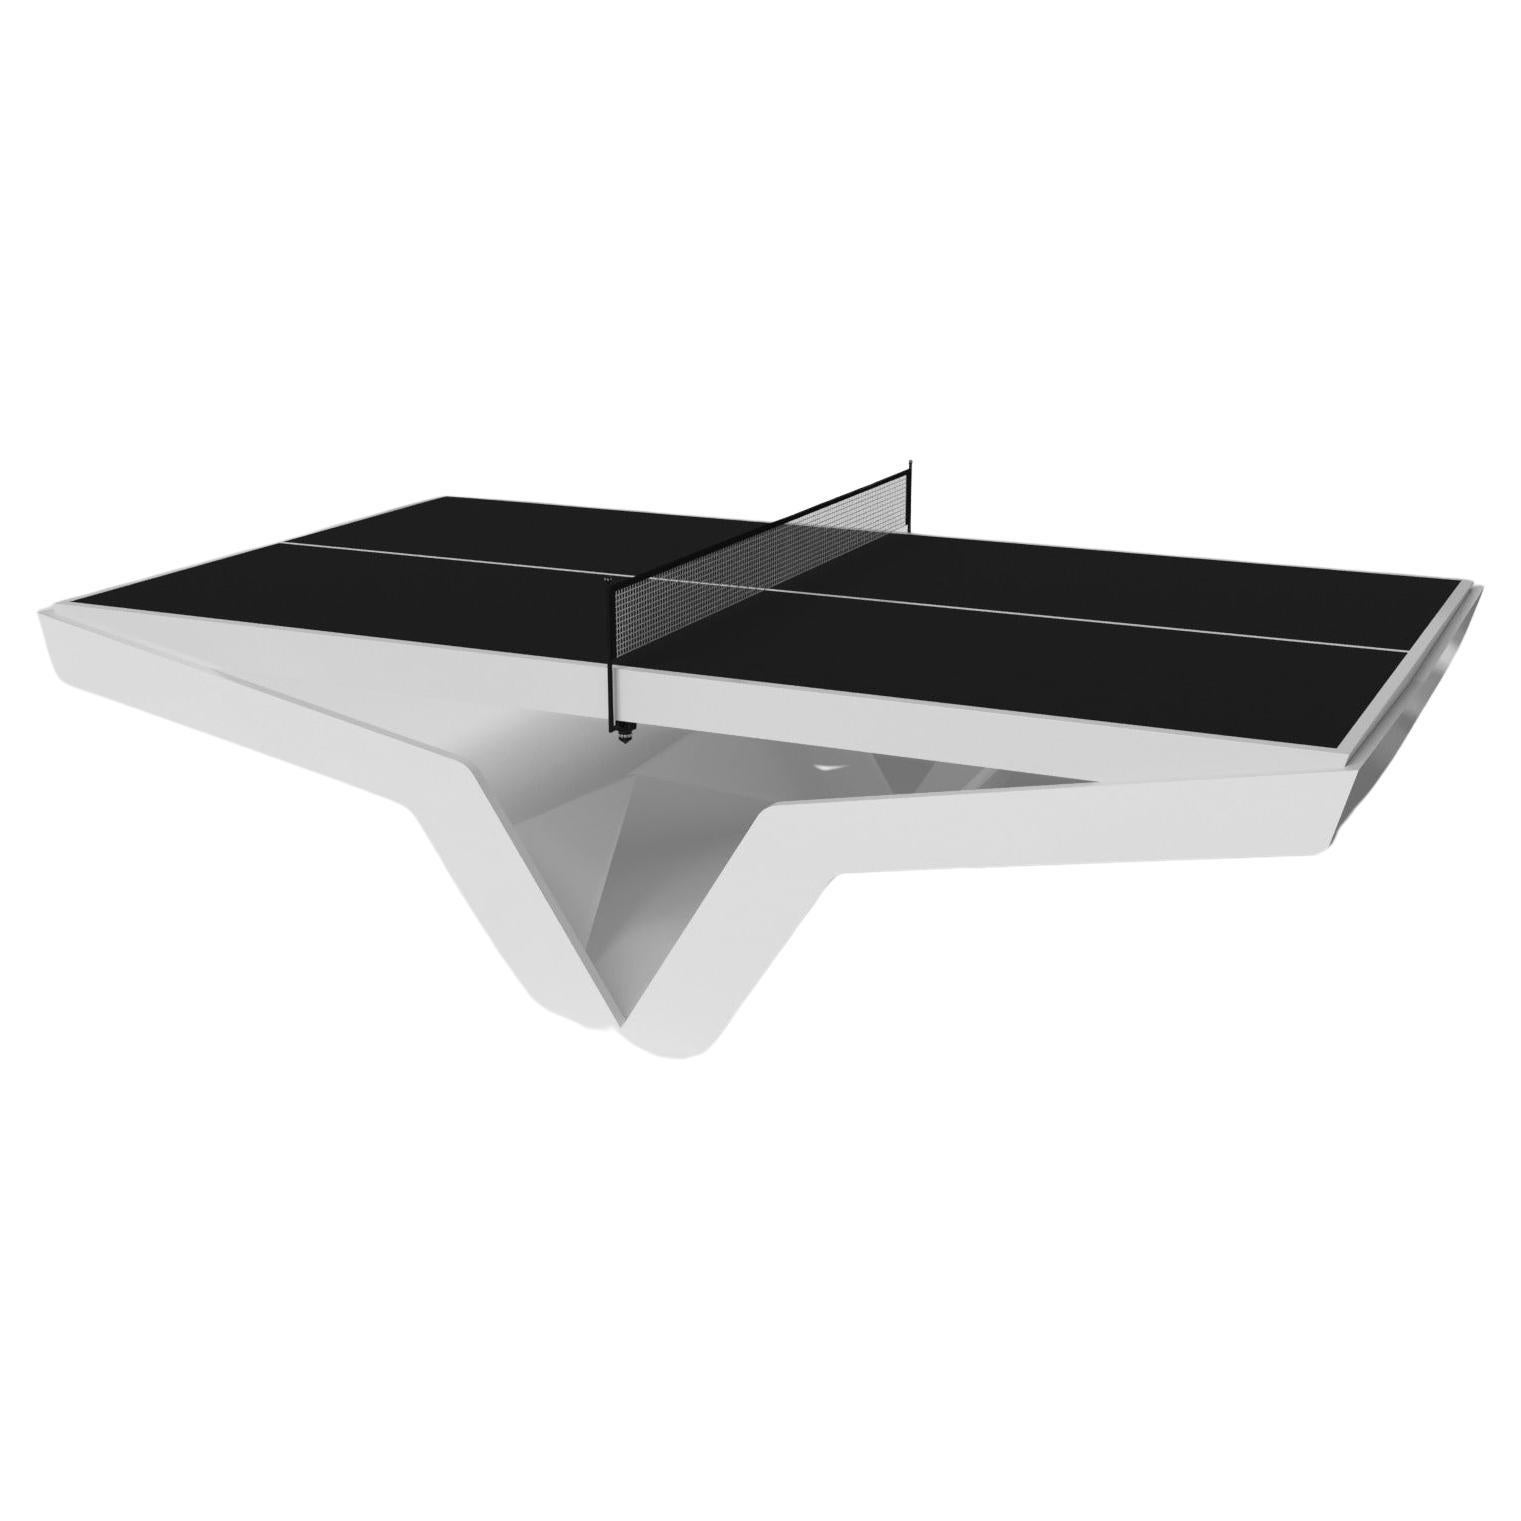 Elevate Customs Enzo Tennis Tables /Solid Pantone White Color in 9' -Made in USA